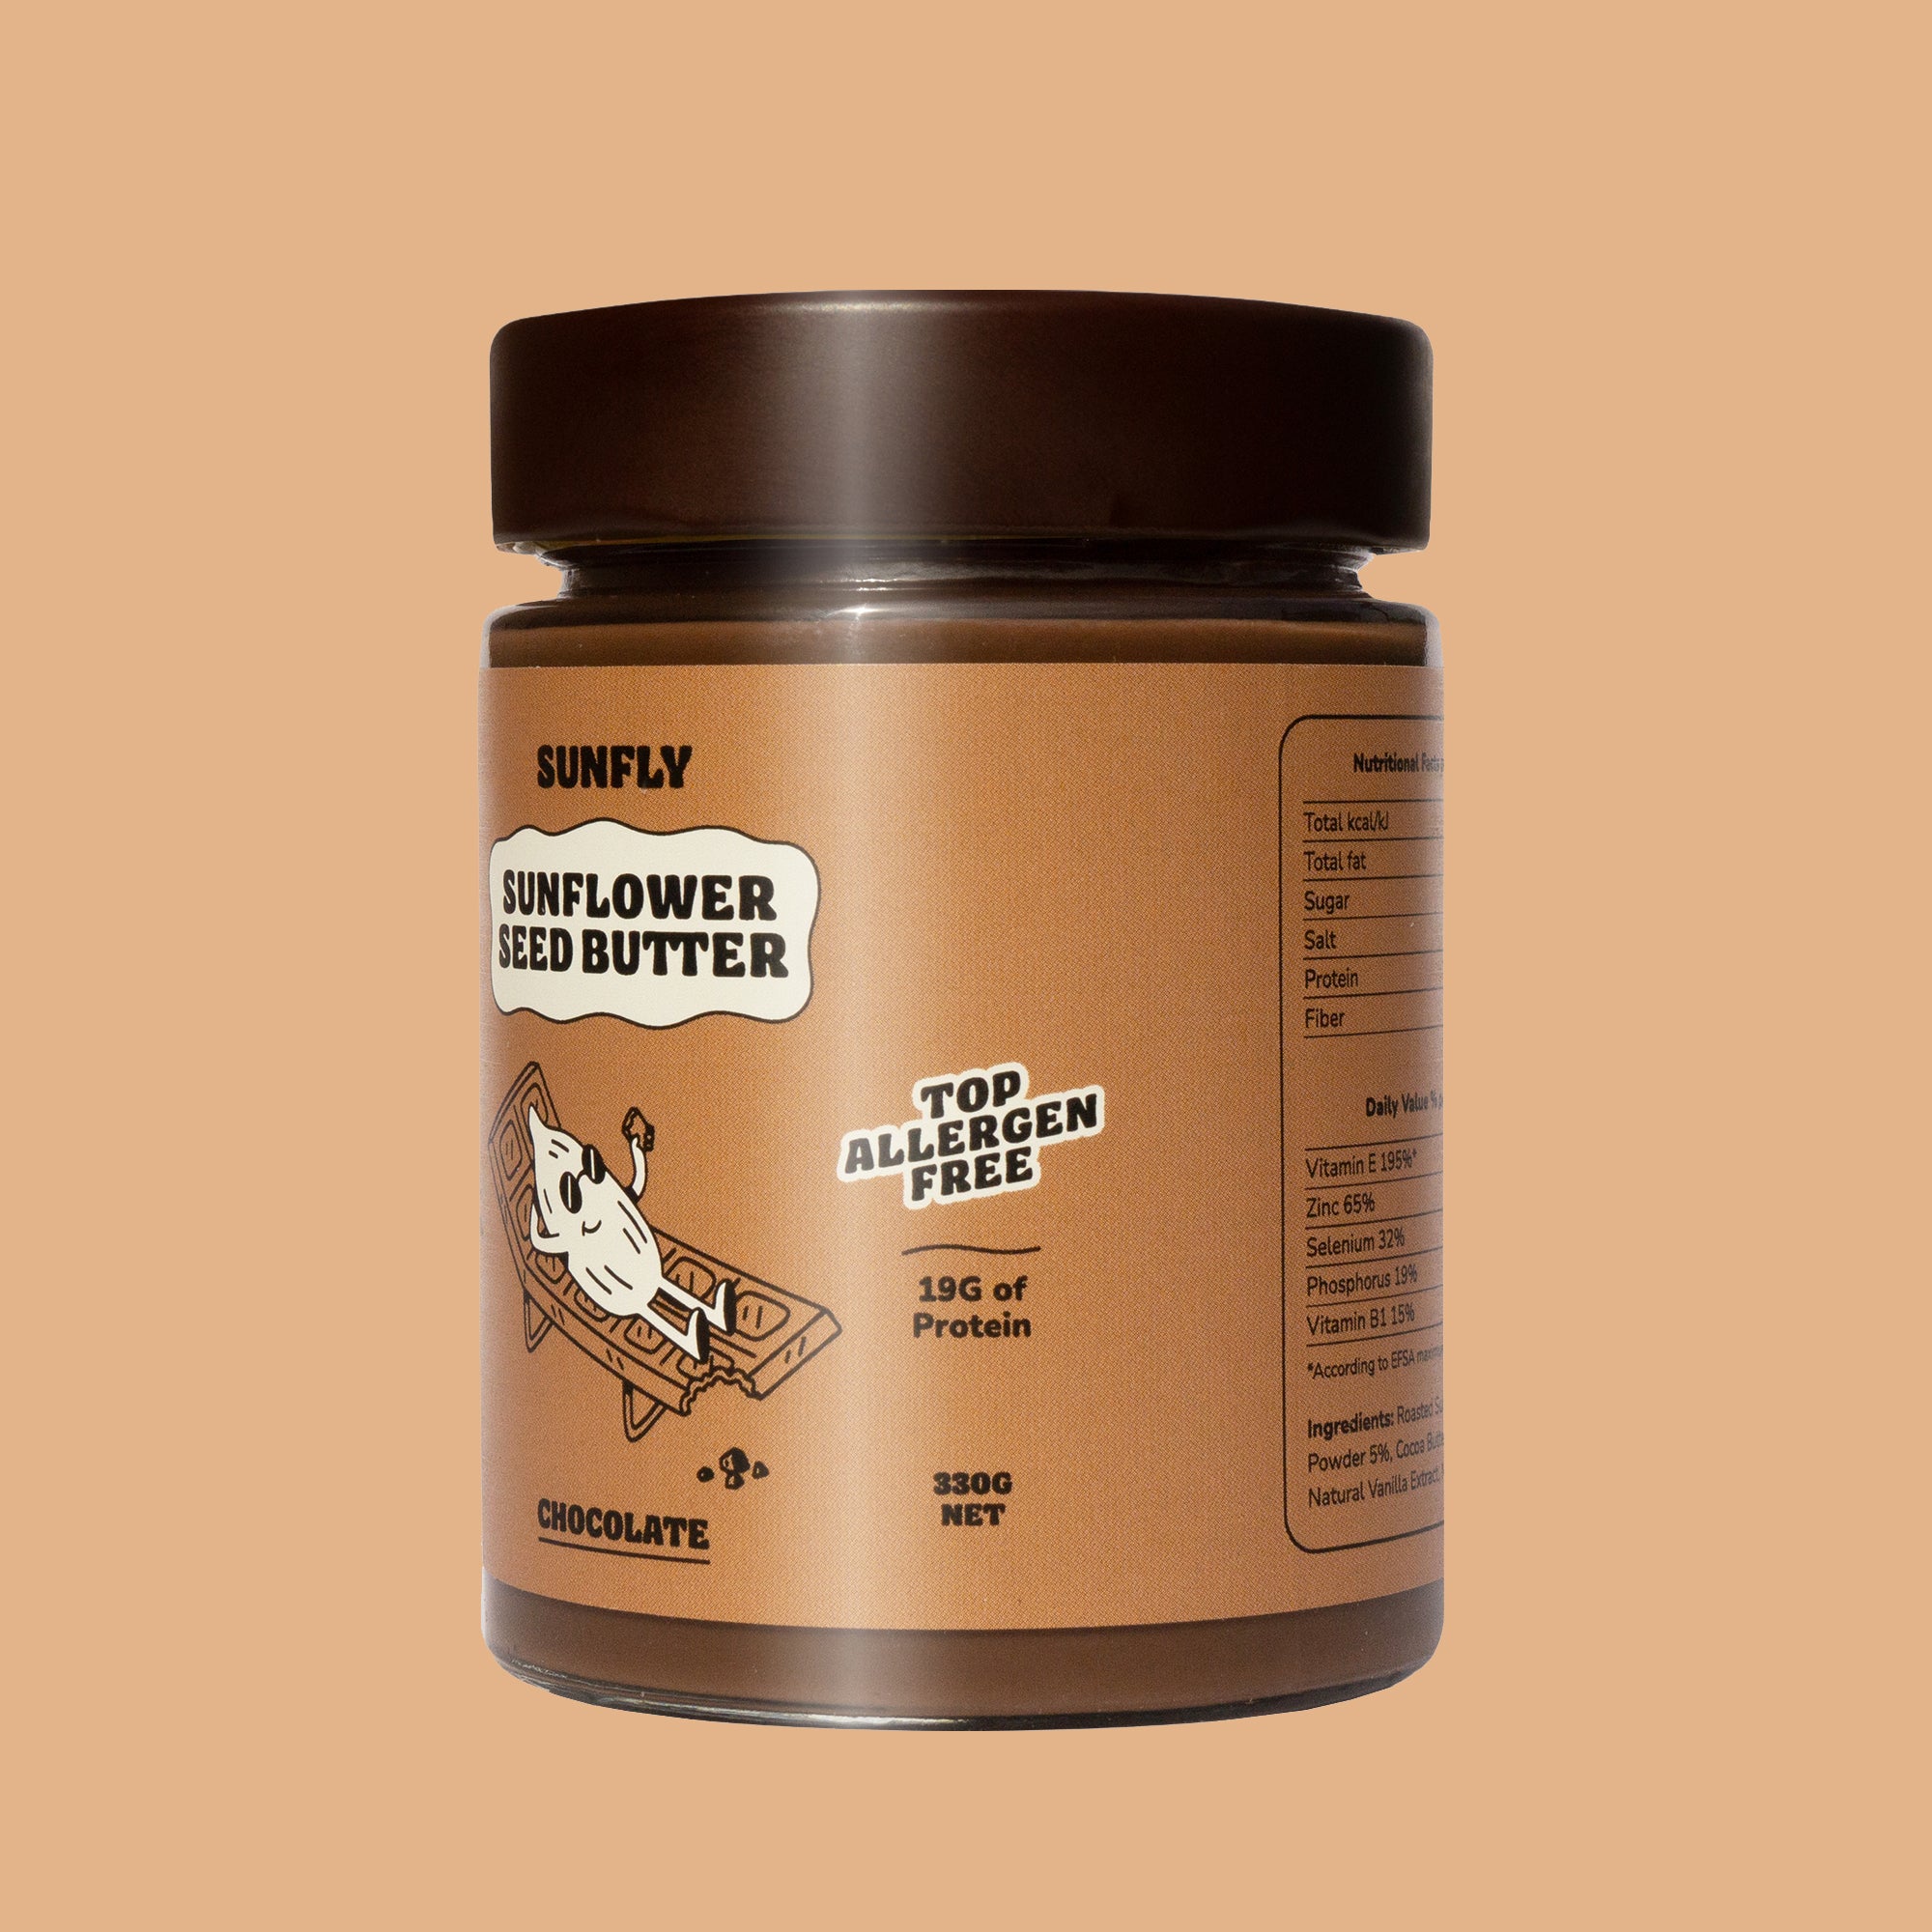 Sunflower Seed Butter: Chocolate